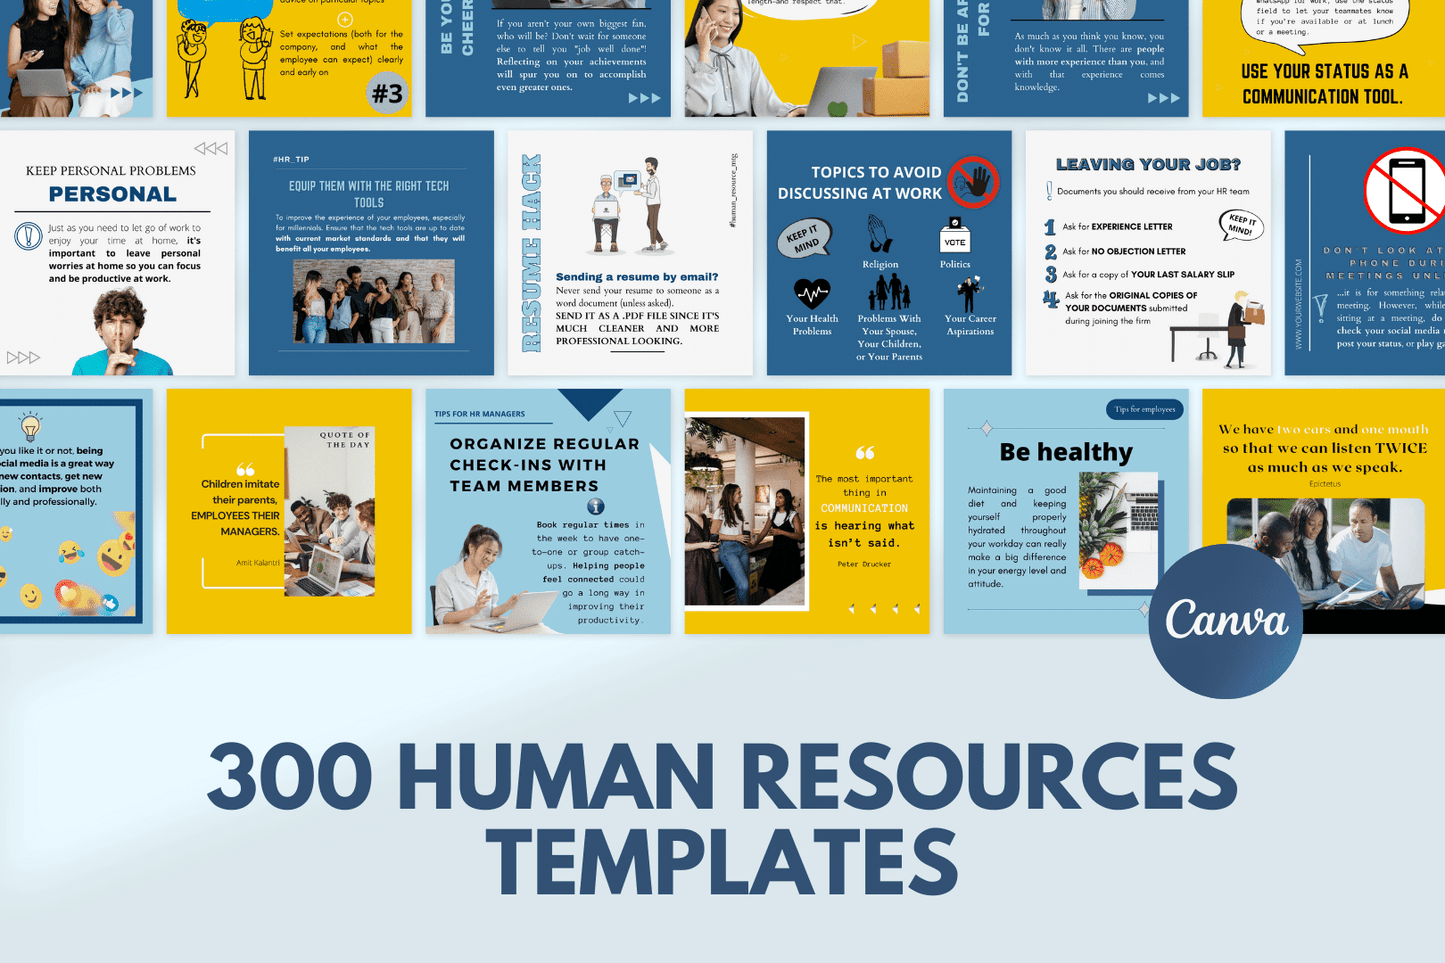 300 Human Resources Templates for Social Media